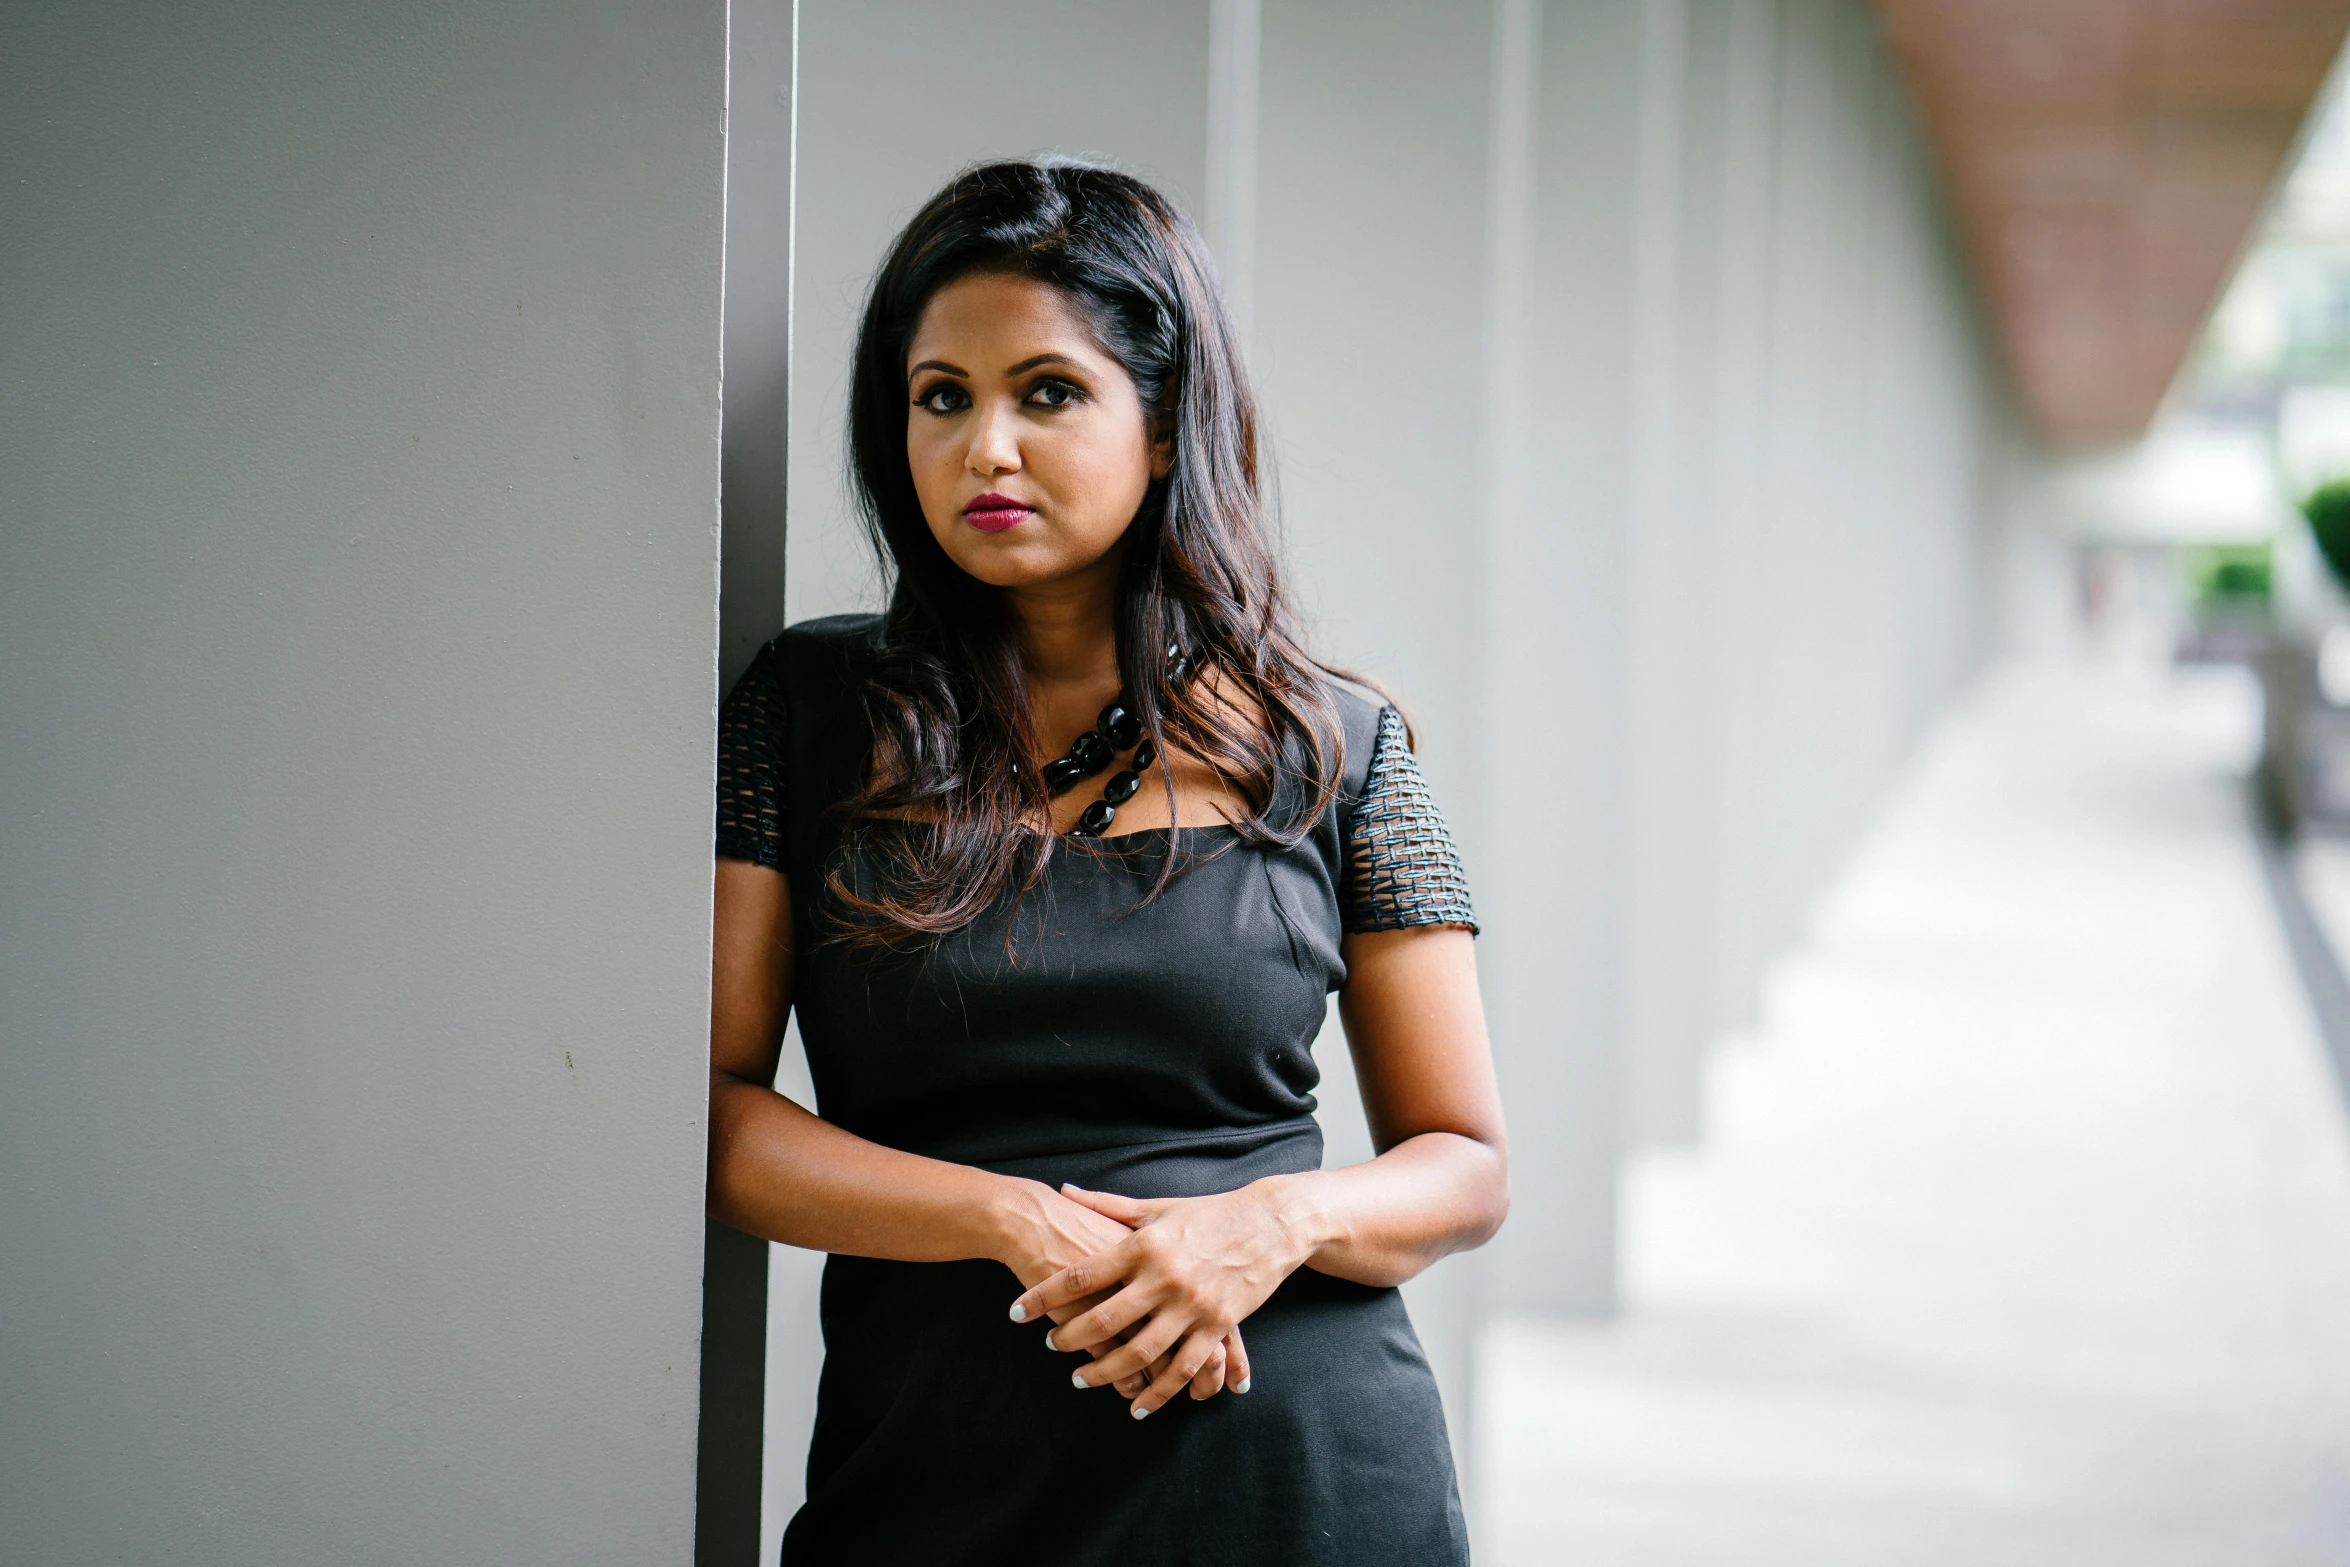 a woman in a black dress leaning against a wall, hurufiyya, bold serious expression, nivanh chanthara, square, professional image